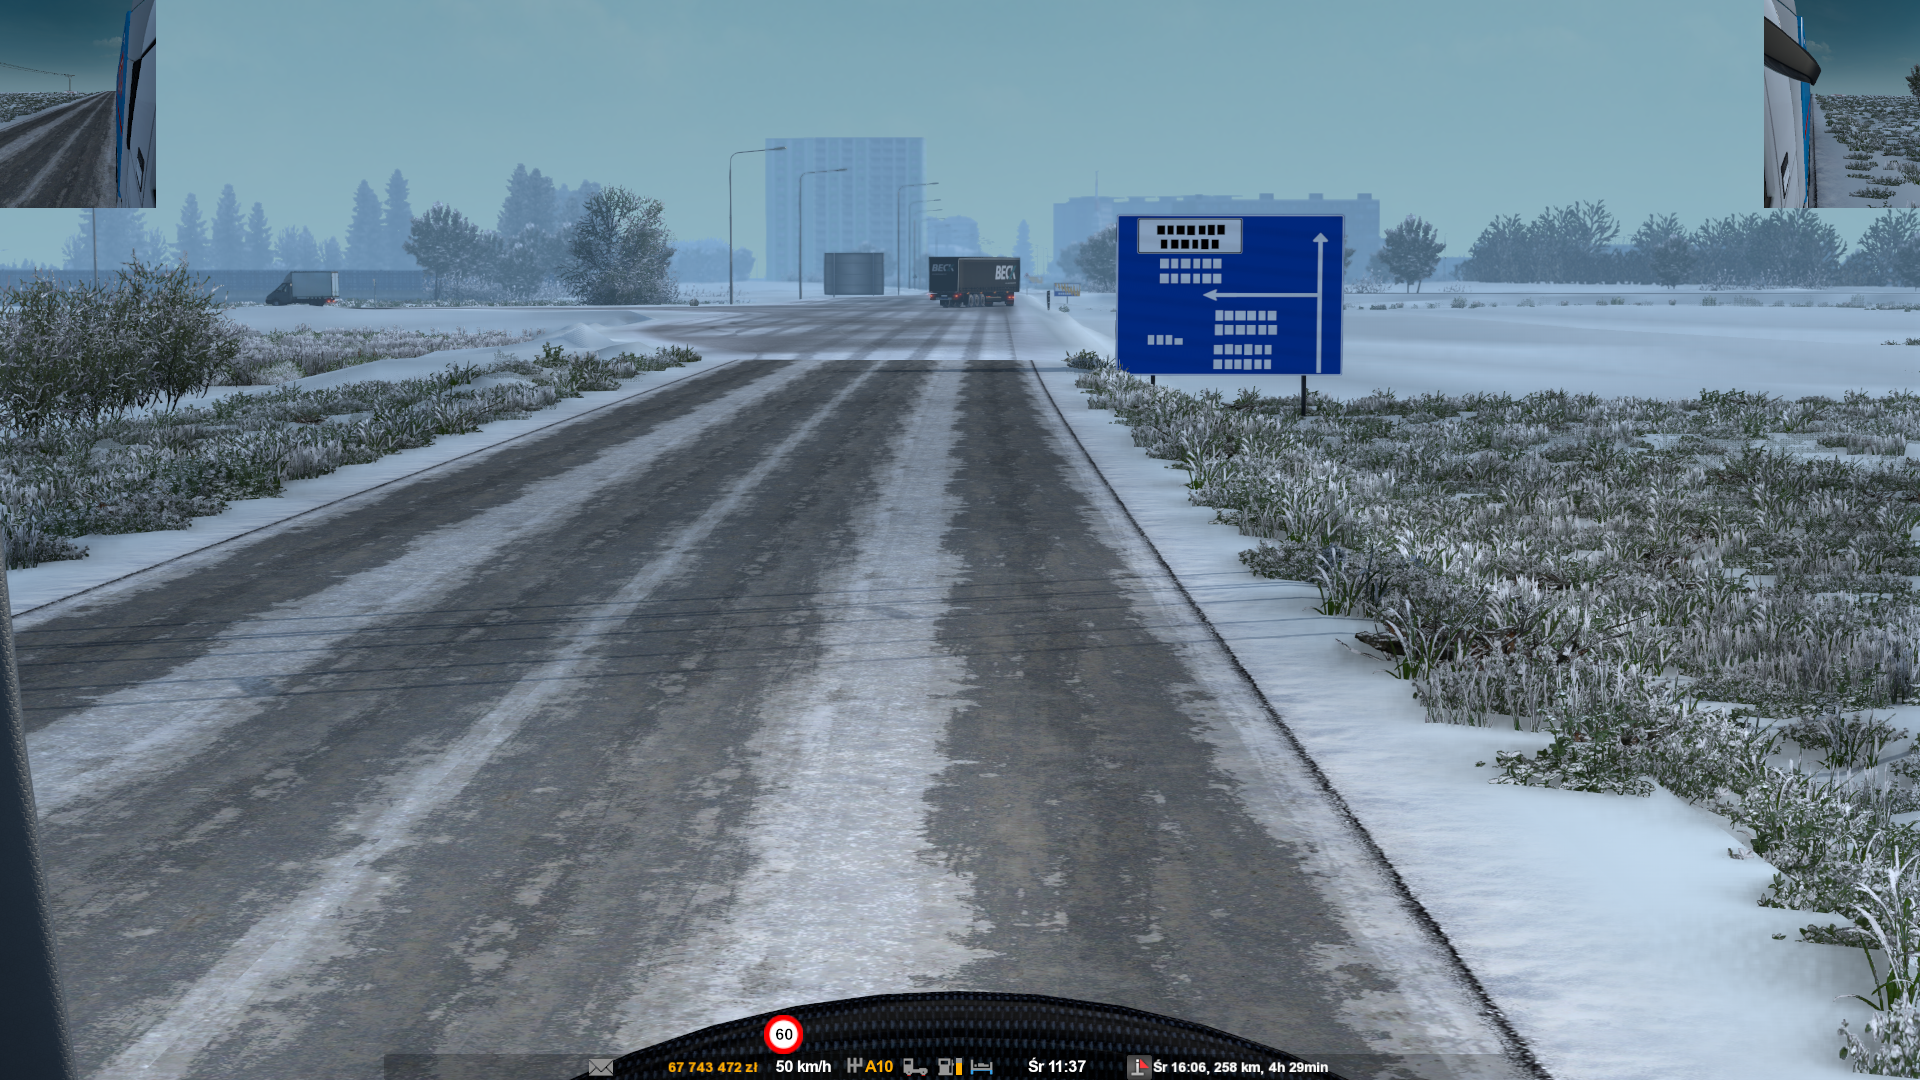 ets2_20201202_185839_00.png